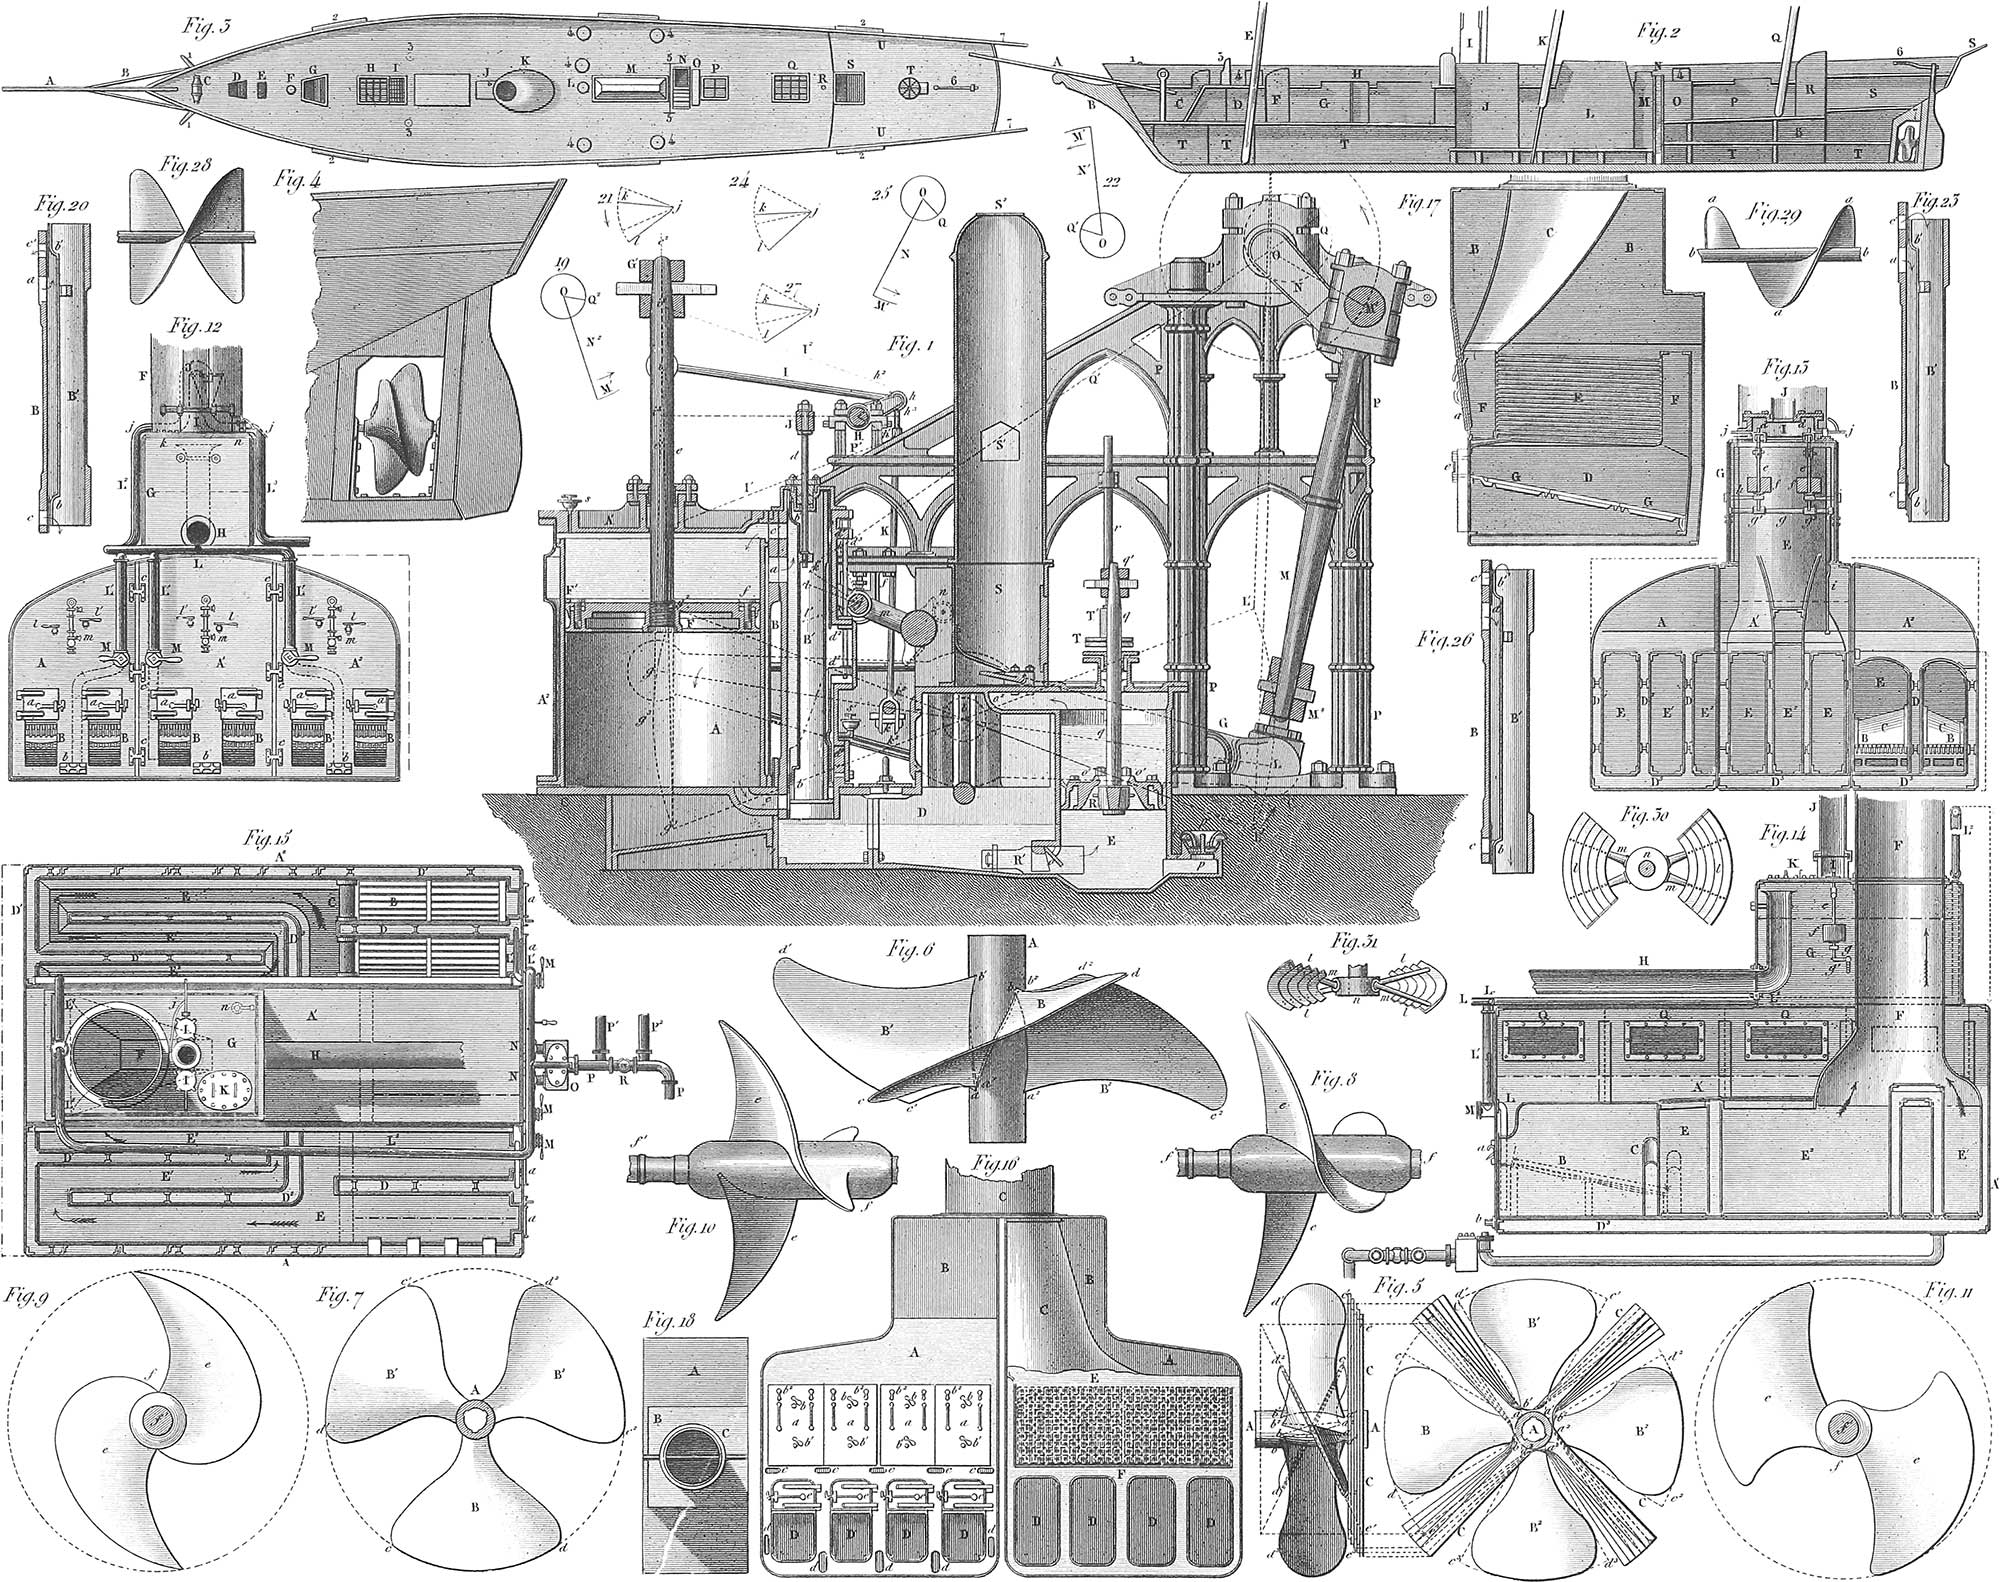 https://www.c82.net/images/iconography/naval-sciences/plate-19/plate-19-preview.jpg